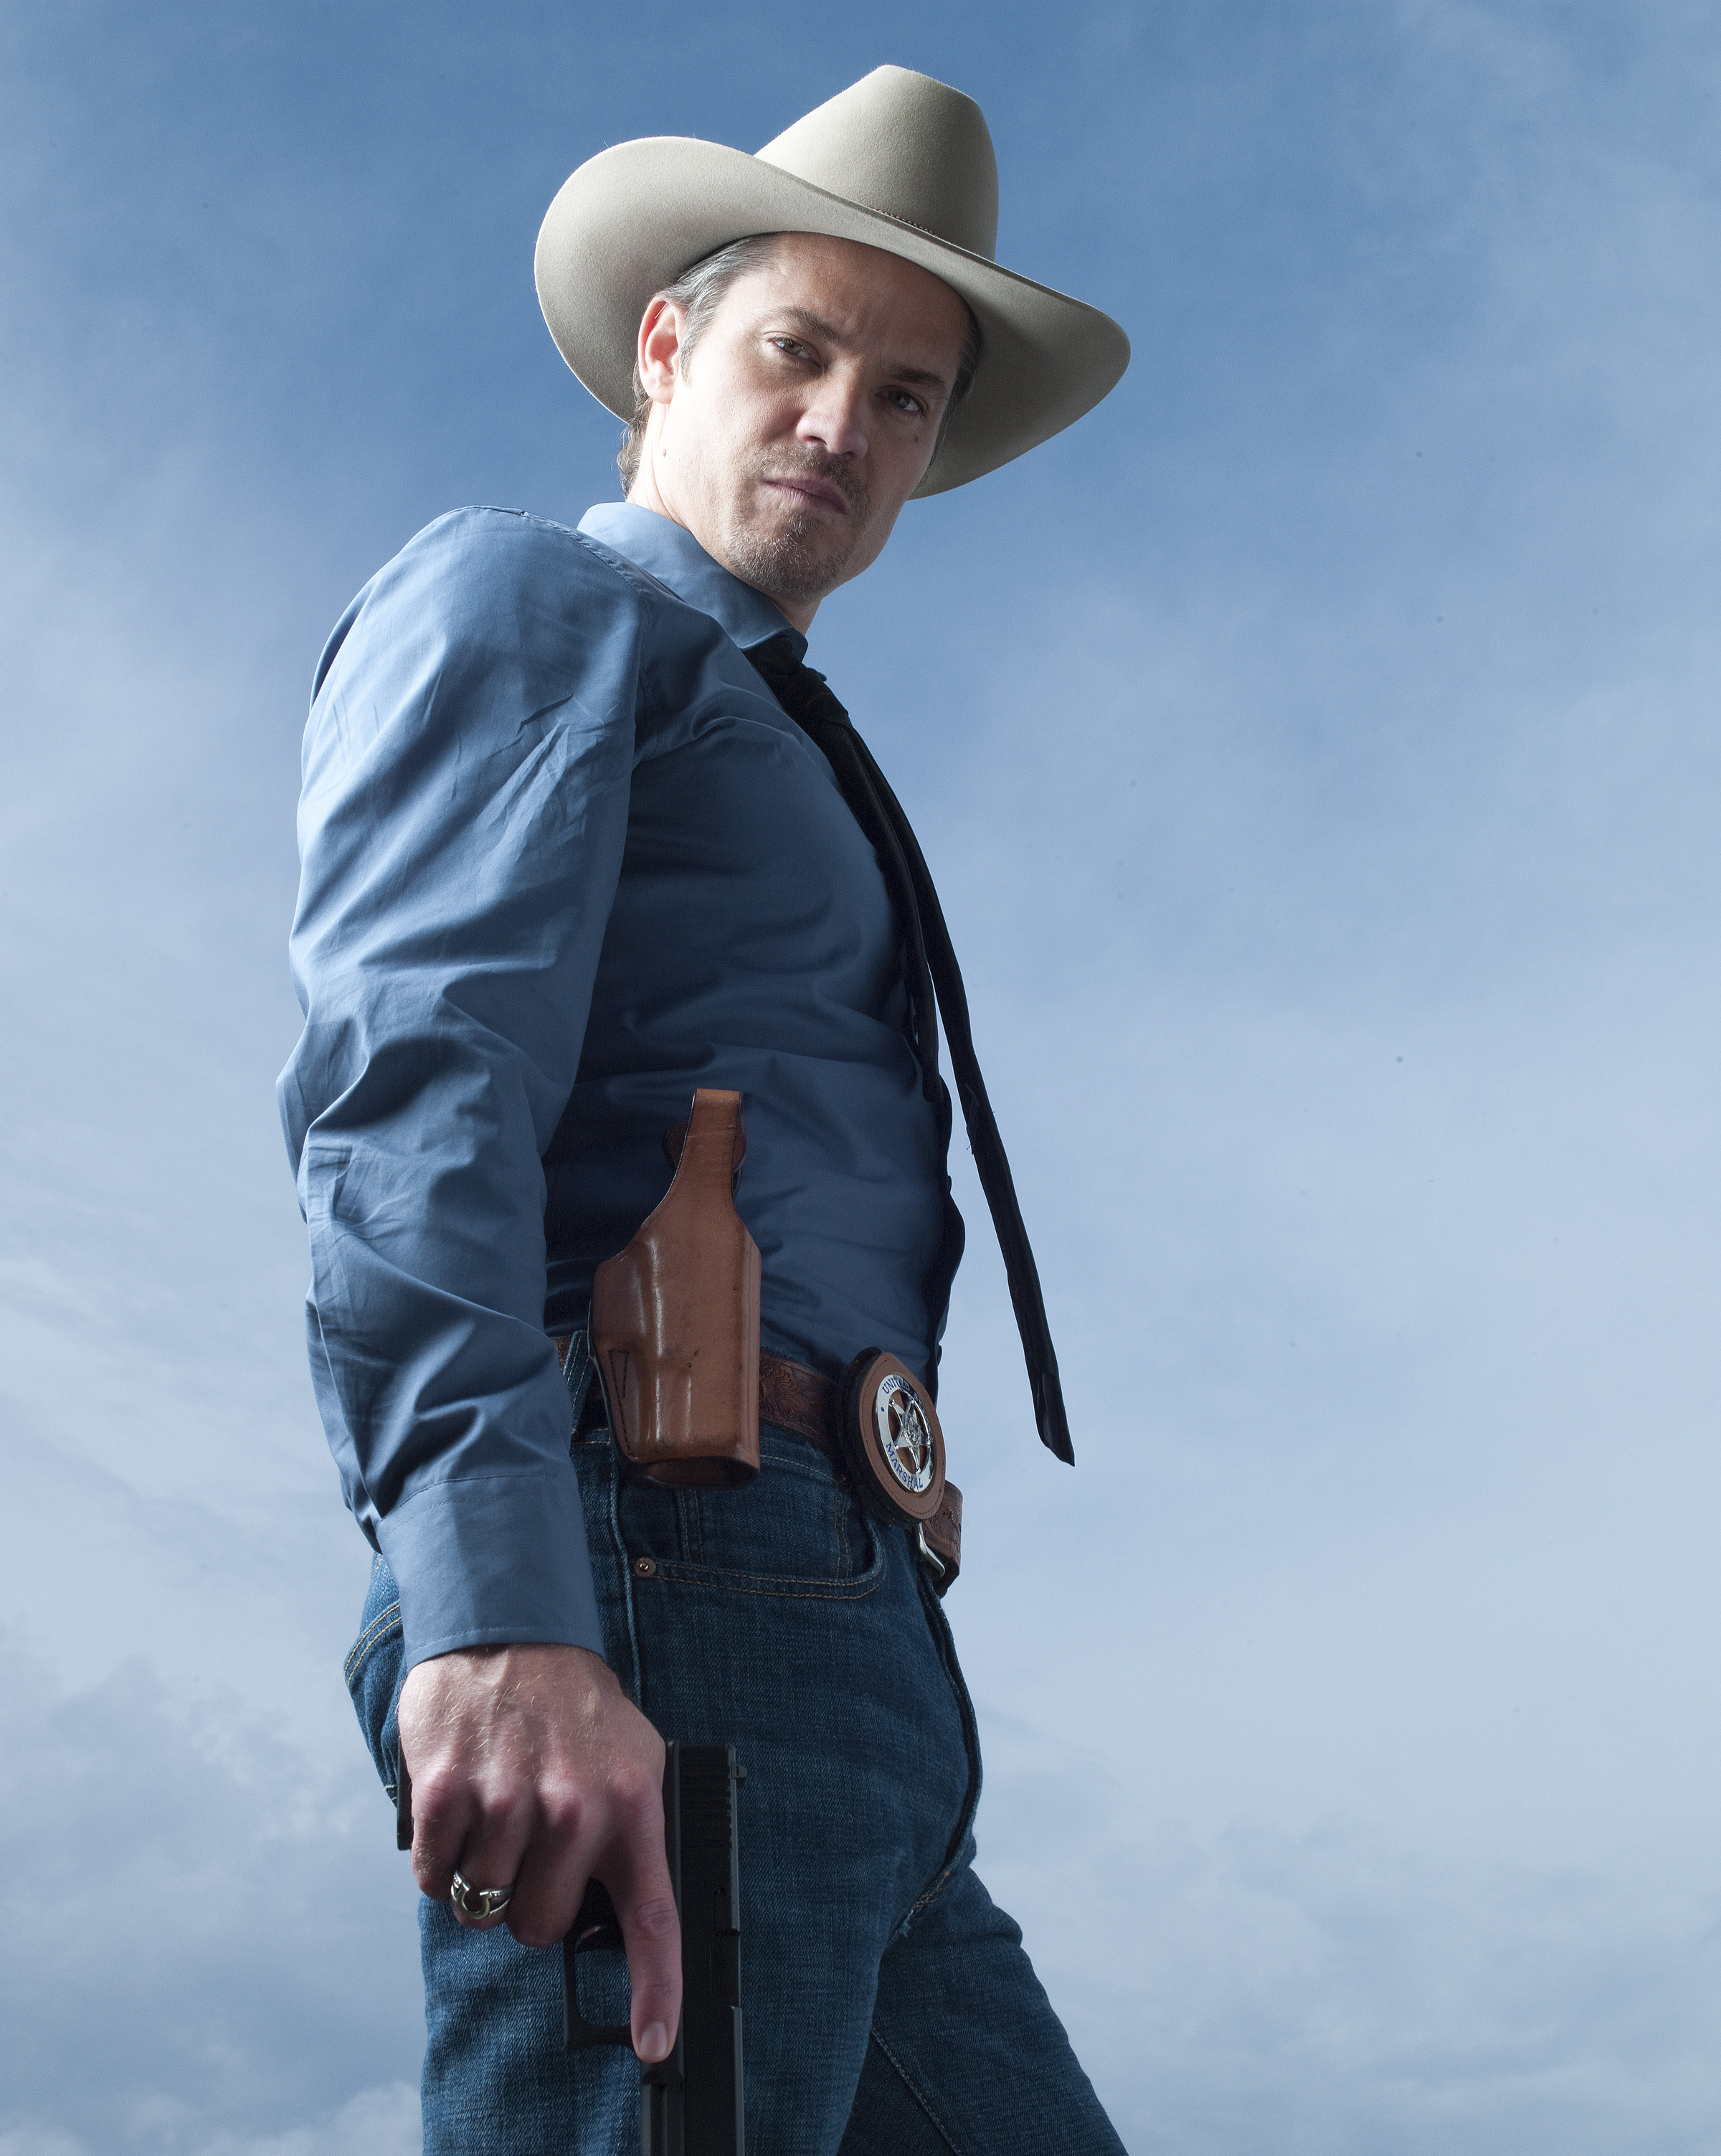 Justified Tv Series Timothy Olyphant Cast Promo Photos Dvdbash